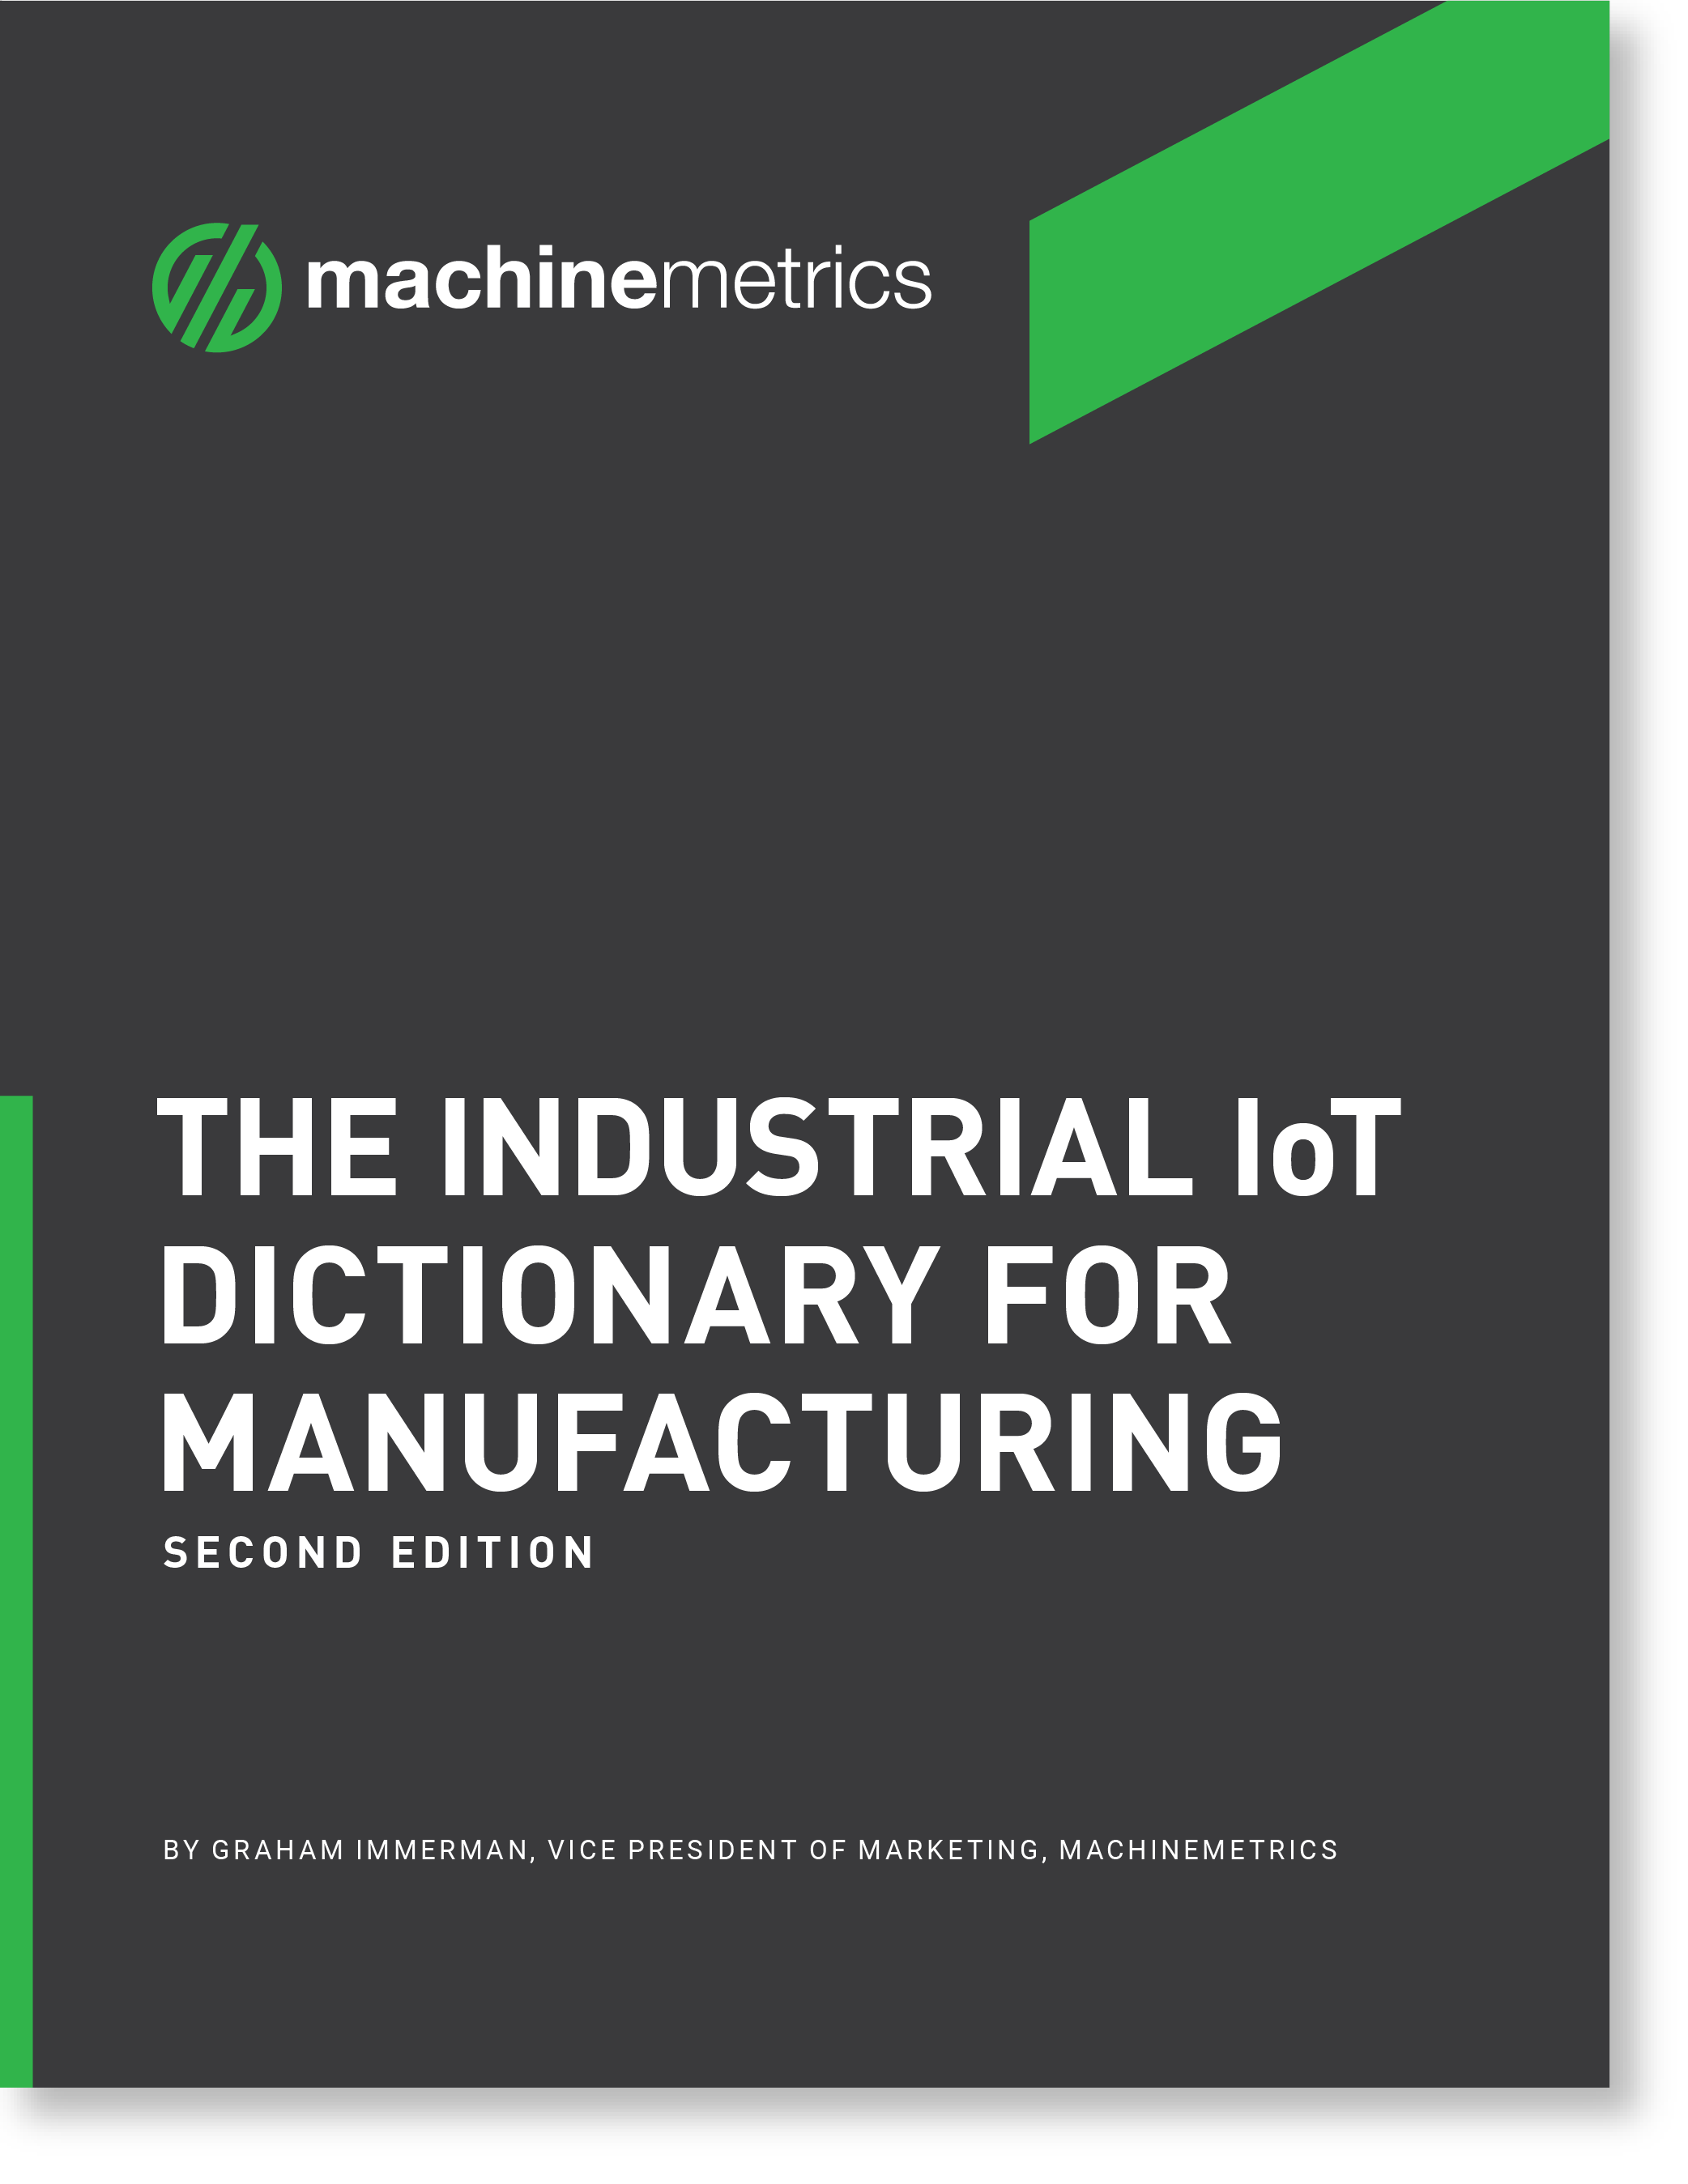 IIoT Dictionary second edition cover with drop_IIoT Dictionary Second Edition